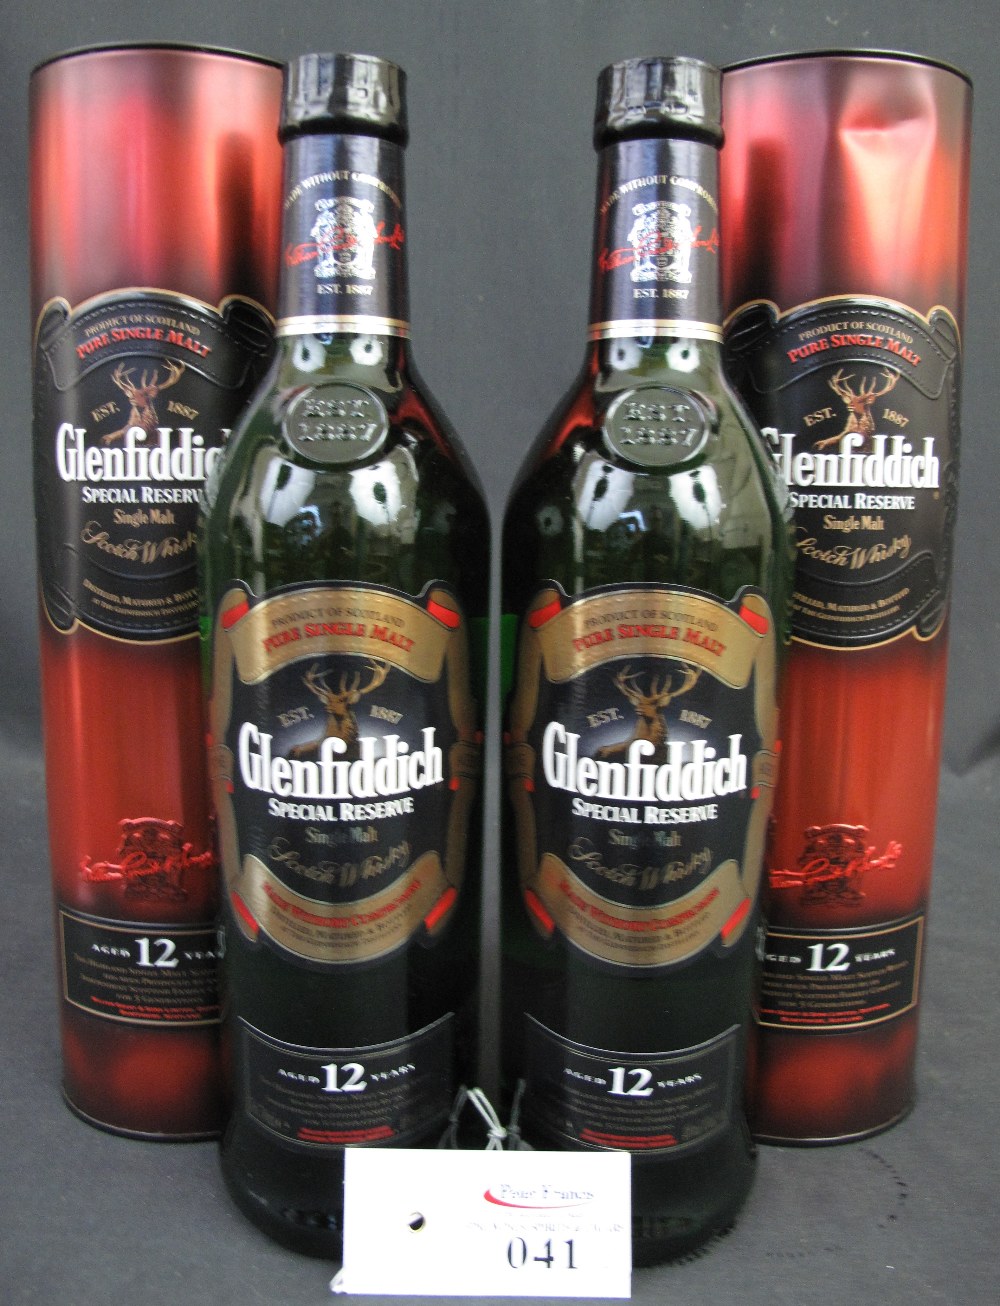 Two bottles of Glenfiddich Special Reser